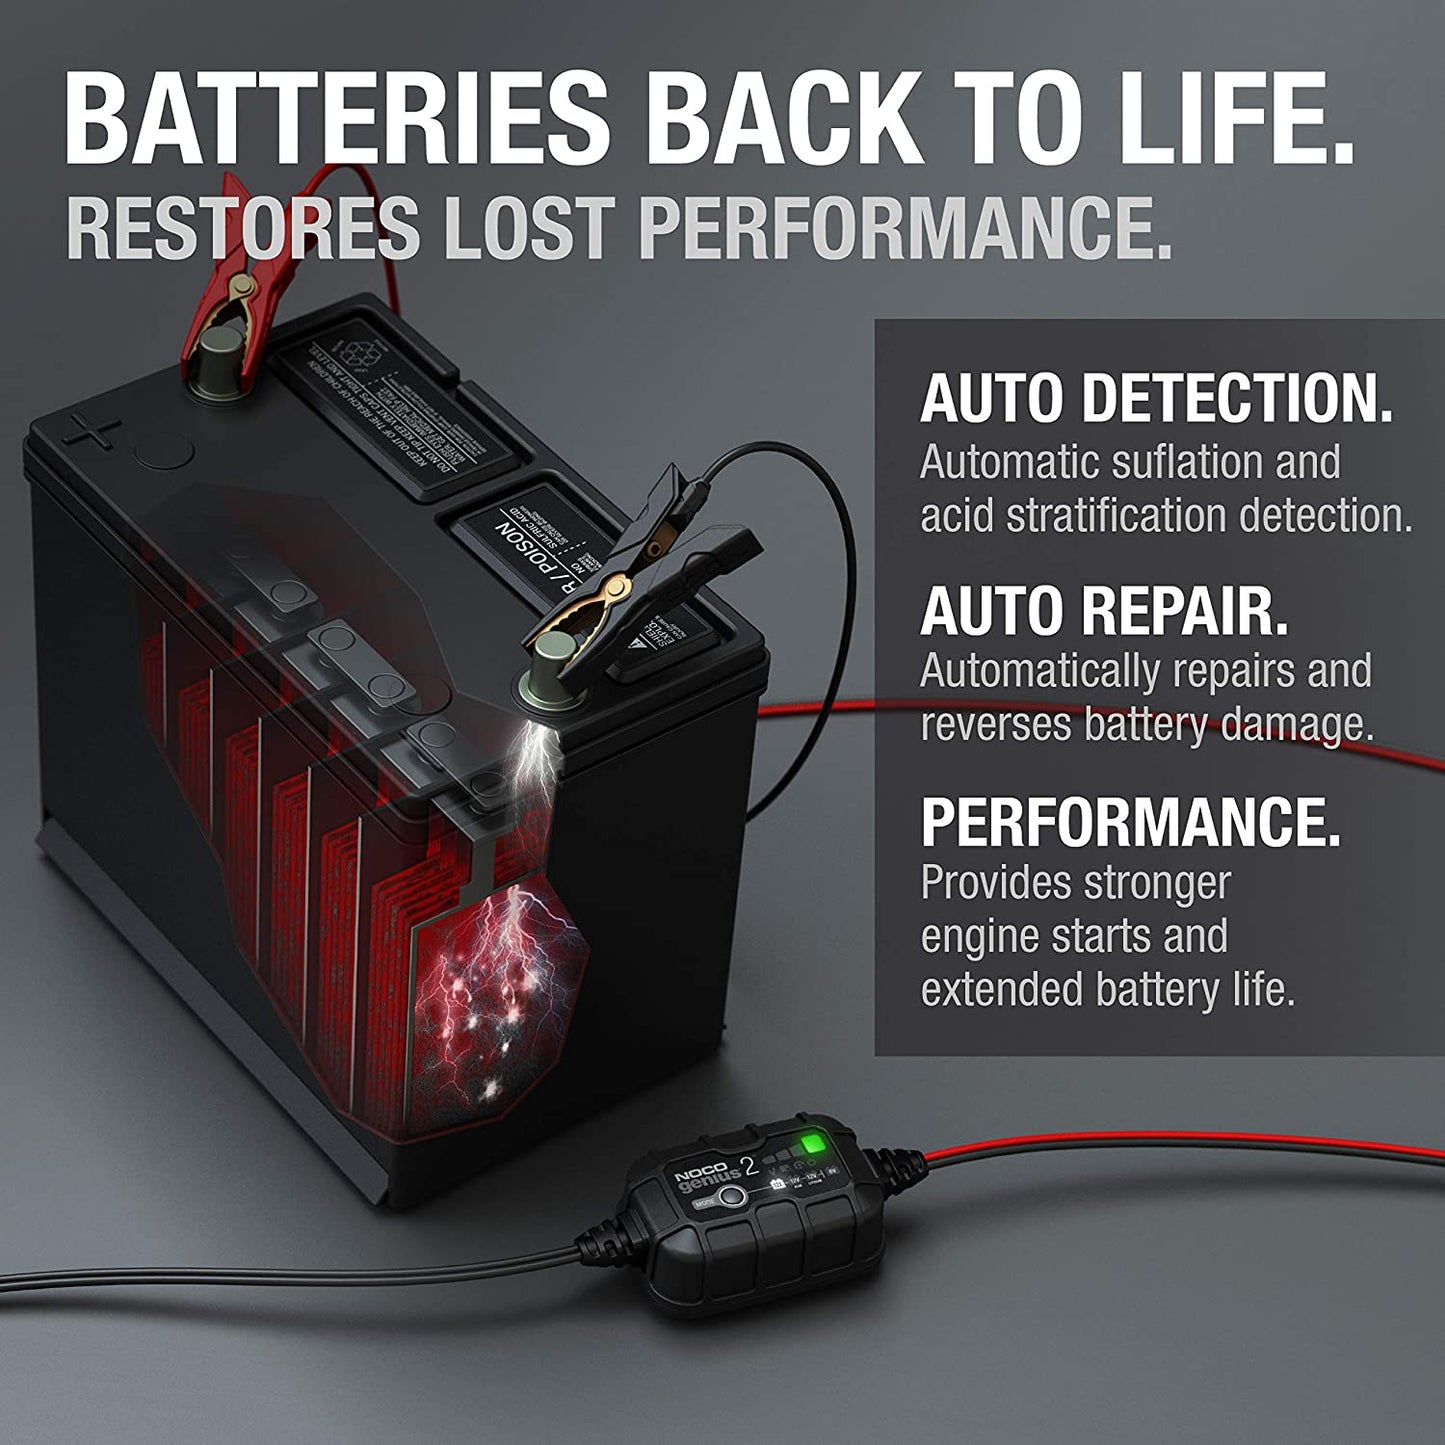 Noco Genius2 2 Amp Battery Charger, Maintainer, and Desulfator